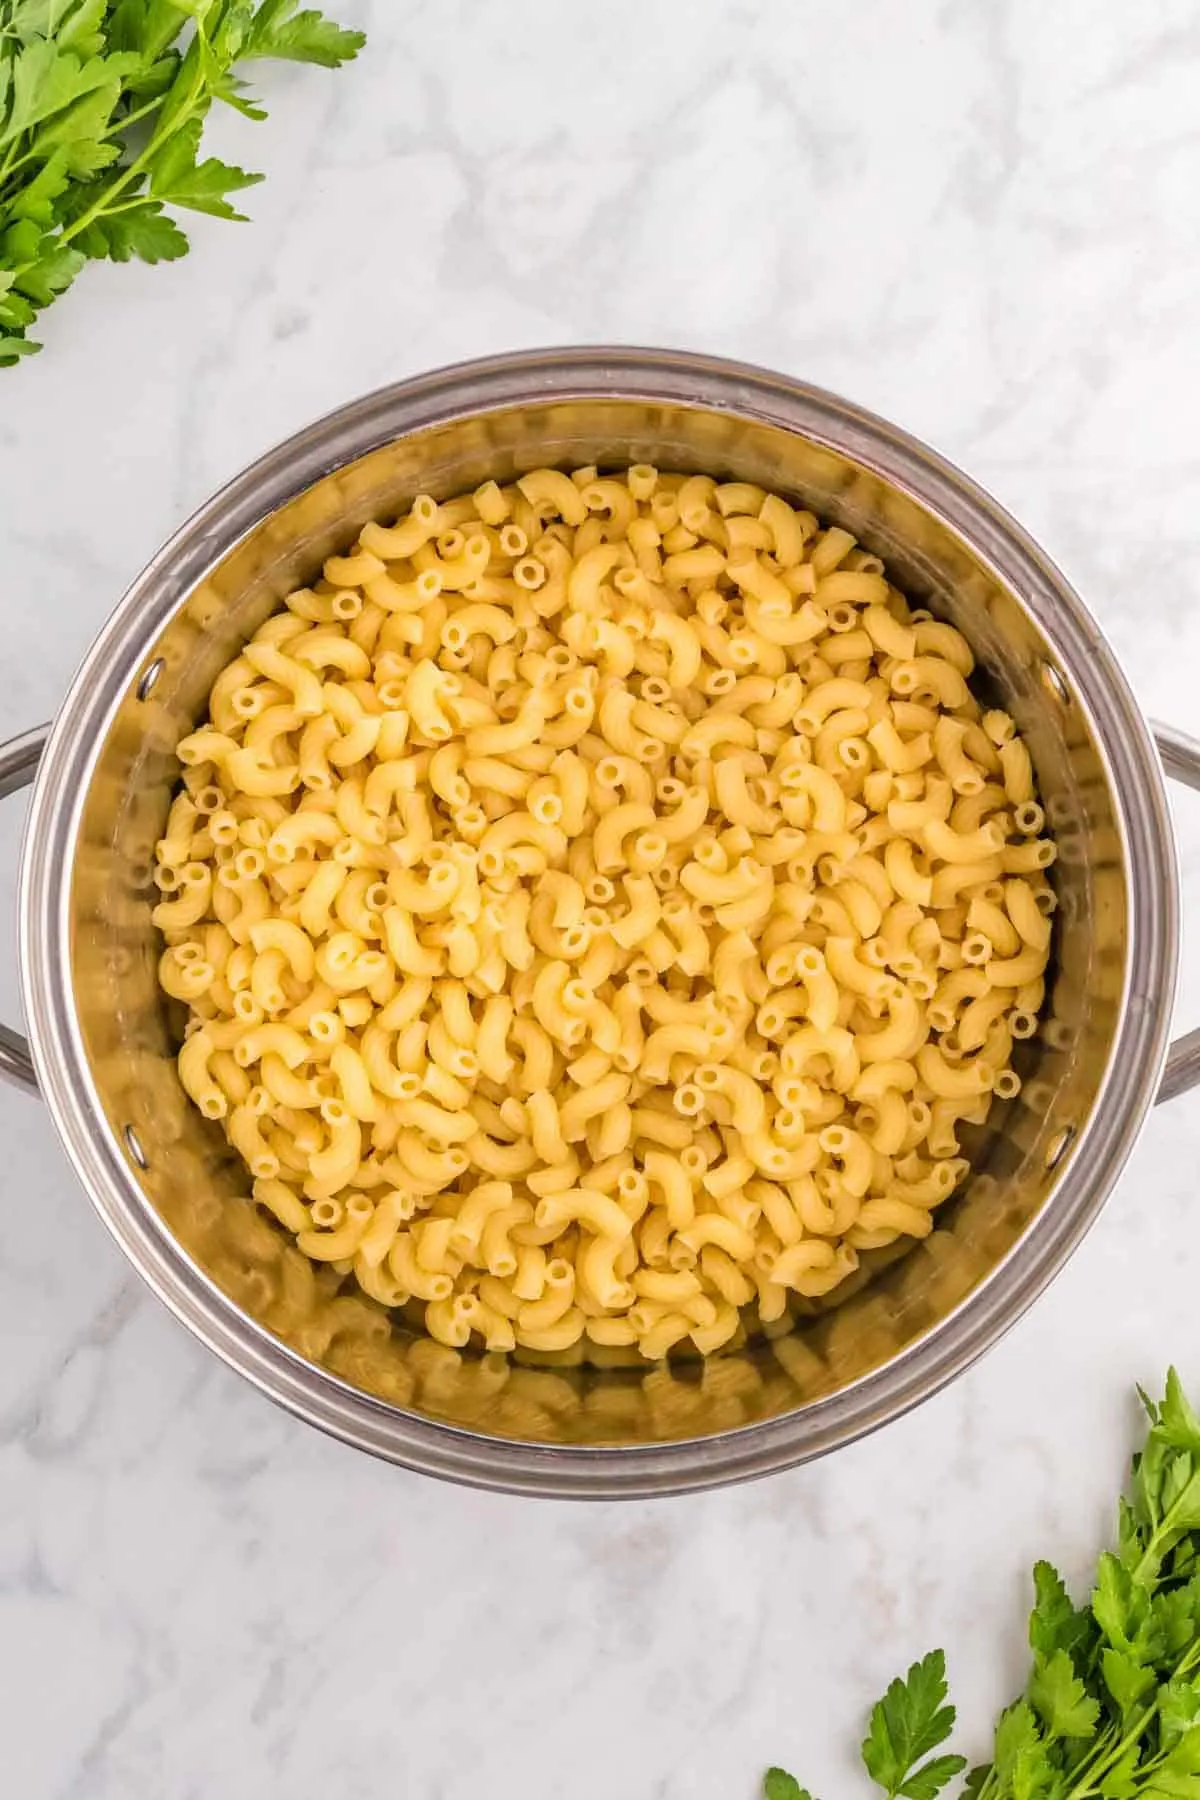 cooked and drained macaroni noodles